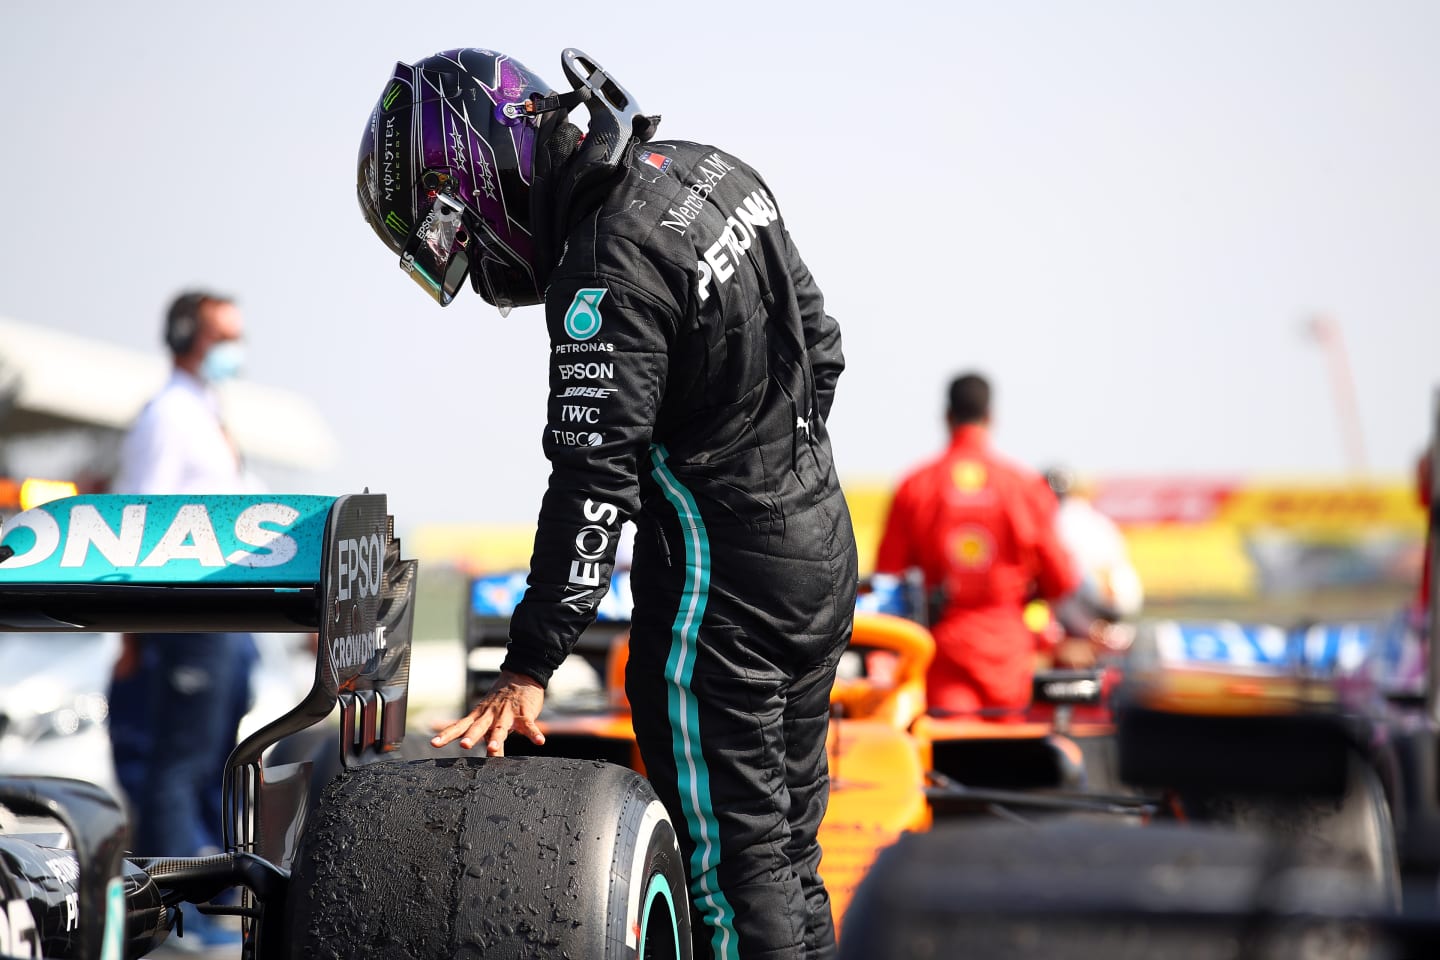 NORTHAMPTON, ENGLAND - AUGUST 09: Second placed Lewis Hamilton of Great Britain and Mercedes GP checks the wear on his tyres in parc ferme during the F1 70th Anniversary Grand Prix at Silverstone on August 09, 2020 in Northampton, England. (Photo by Bryn Lennon/Getty Images)